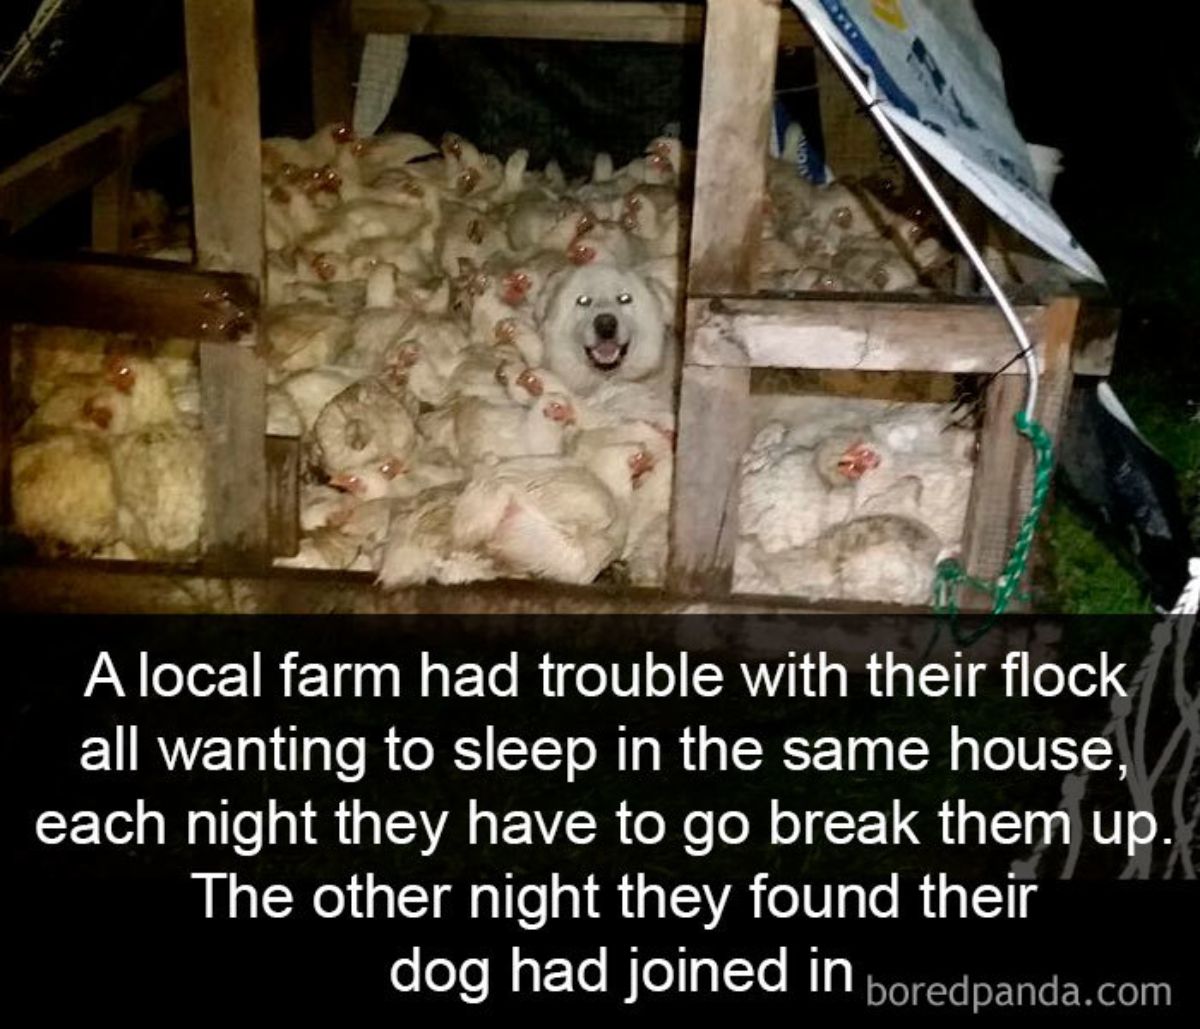 a large number of white chickens in a small coop with a white dog in the middle with a caption saying a local farm had trouble with their flock all wanting to sleep in the same house so each night they have to break them up. the other night they found their dog had joined in